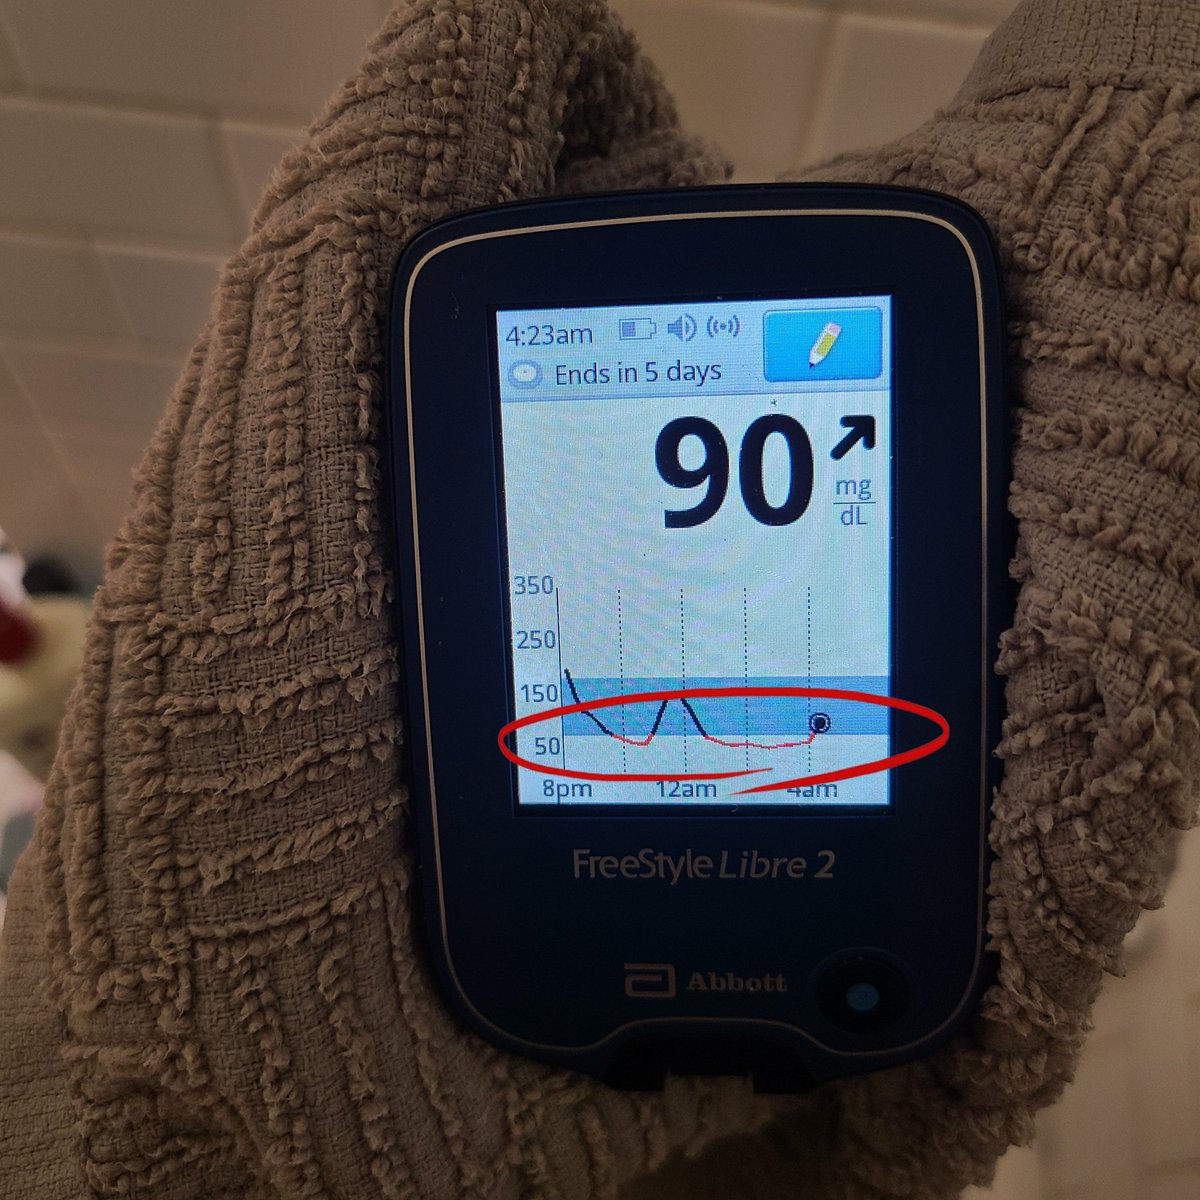 Early morning visit from the EMTs thanks to a #HypoglycemicEpisode!
Luckily, #ShavarDClark was able to bring me out of it just before they arrived.
Now to let the warm shower relax me & then back to sleep!

#BlackDiabetic #DiaBadAss #T1D #DiabetesWarrior #DiabetesAwareness